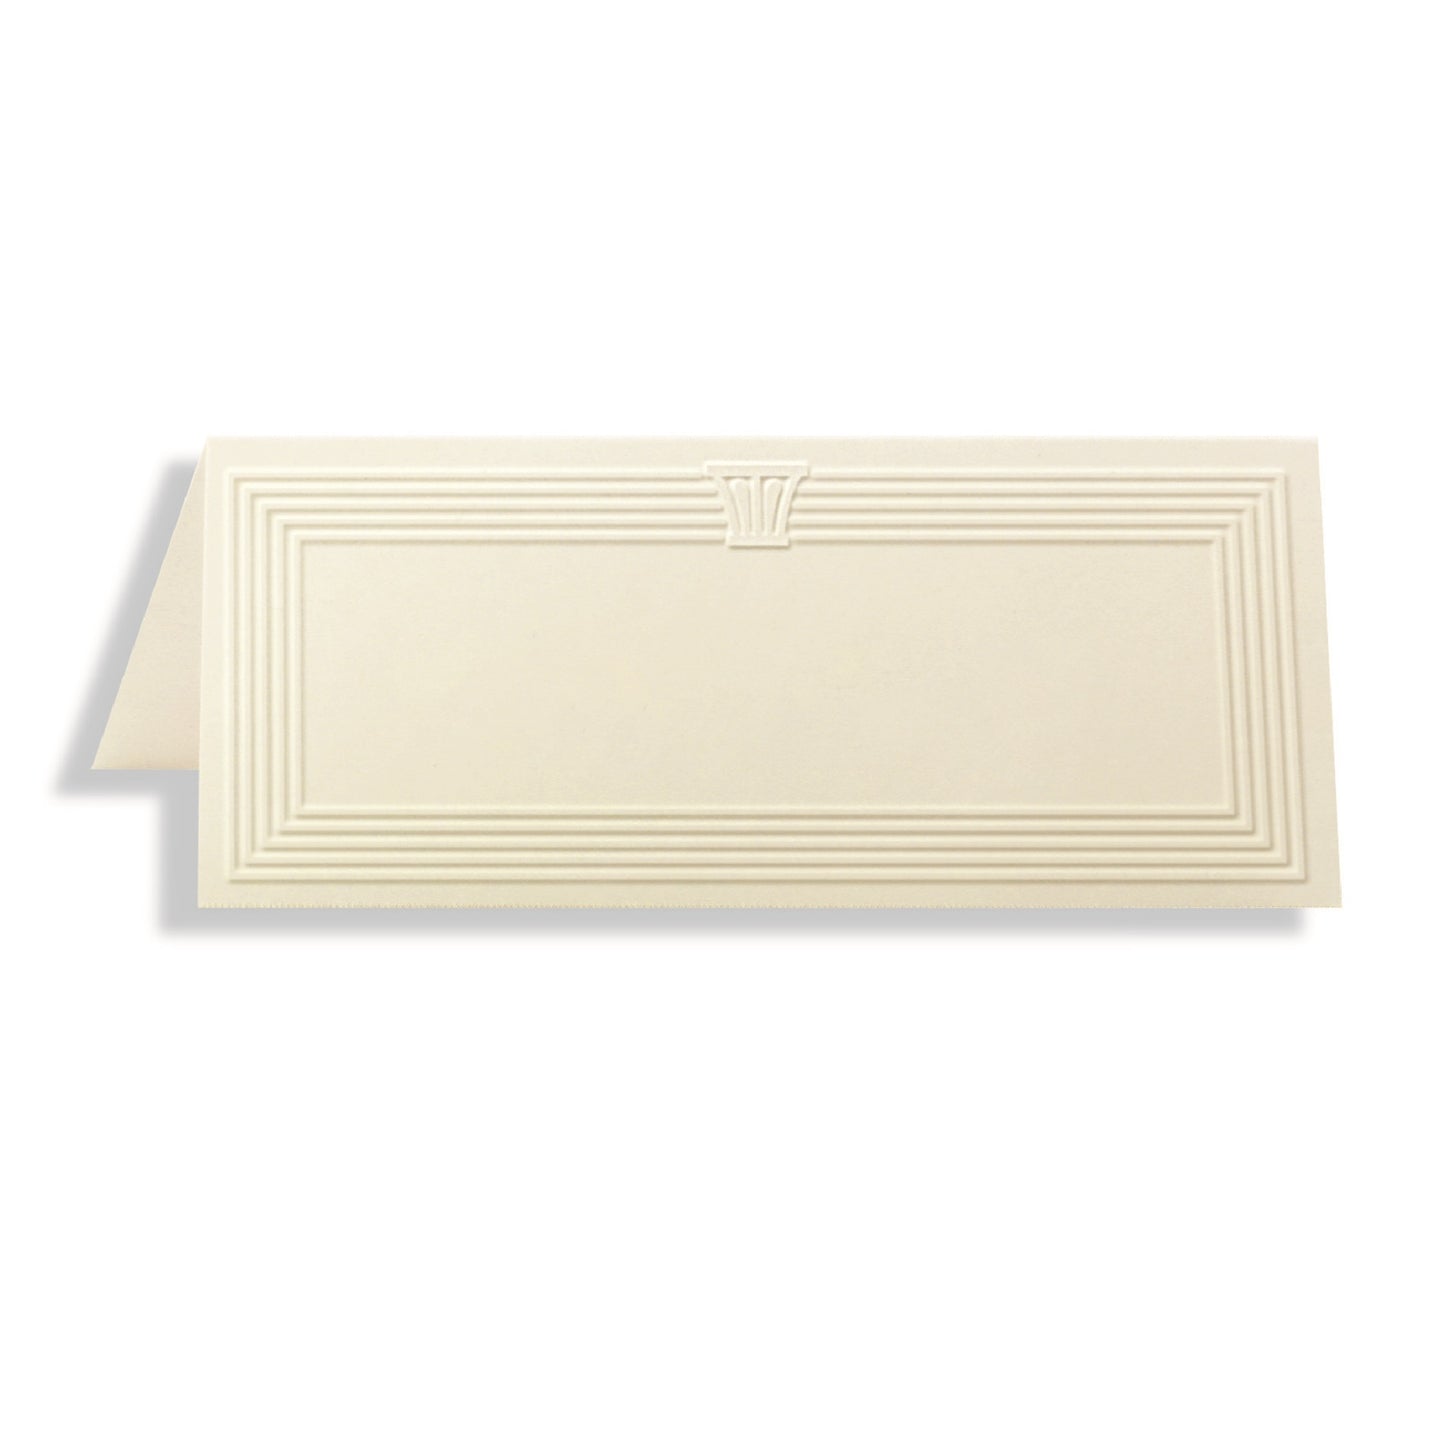 St. James® Overtures® Capital Embossed Place Cards, Ivory, Fold to 1¾ x 4¼", Pack of 60